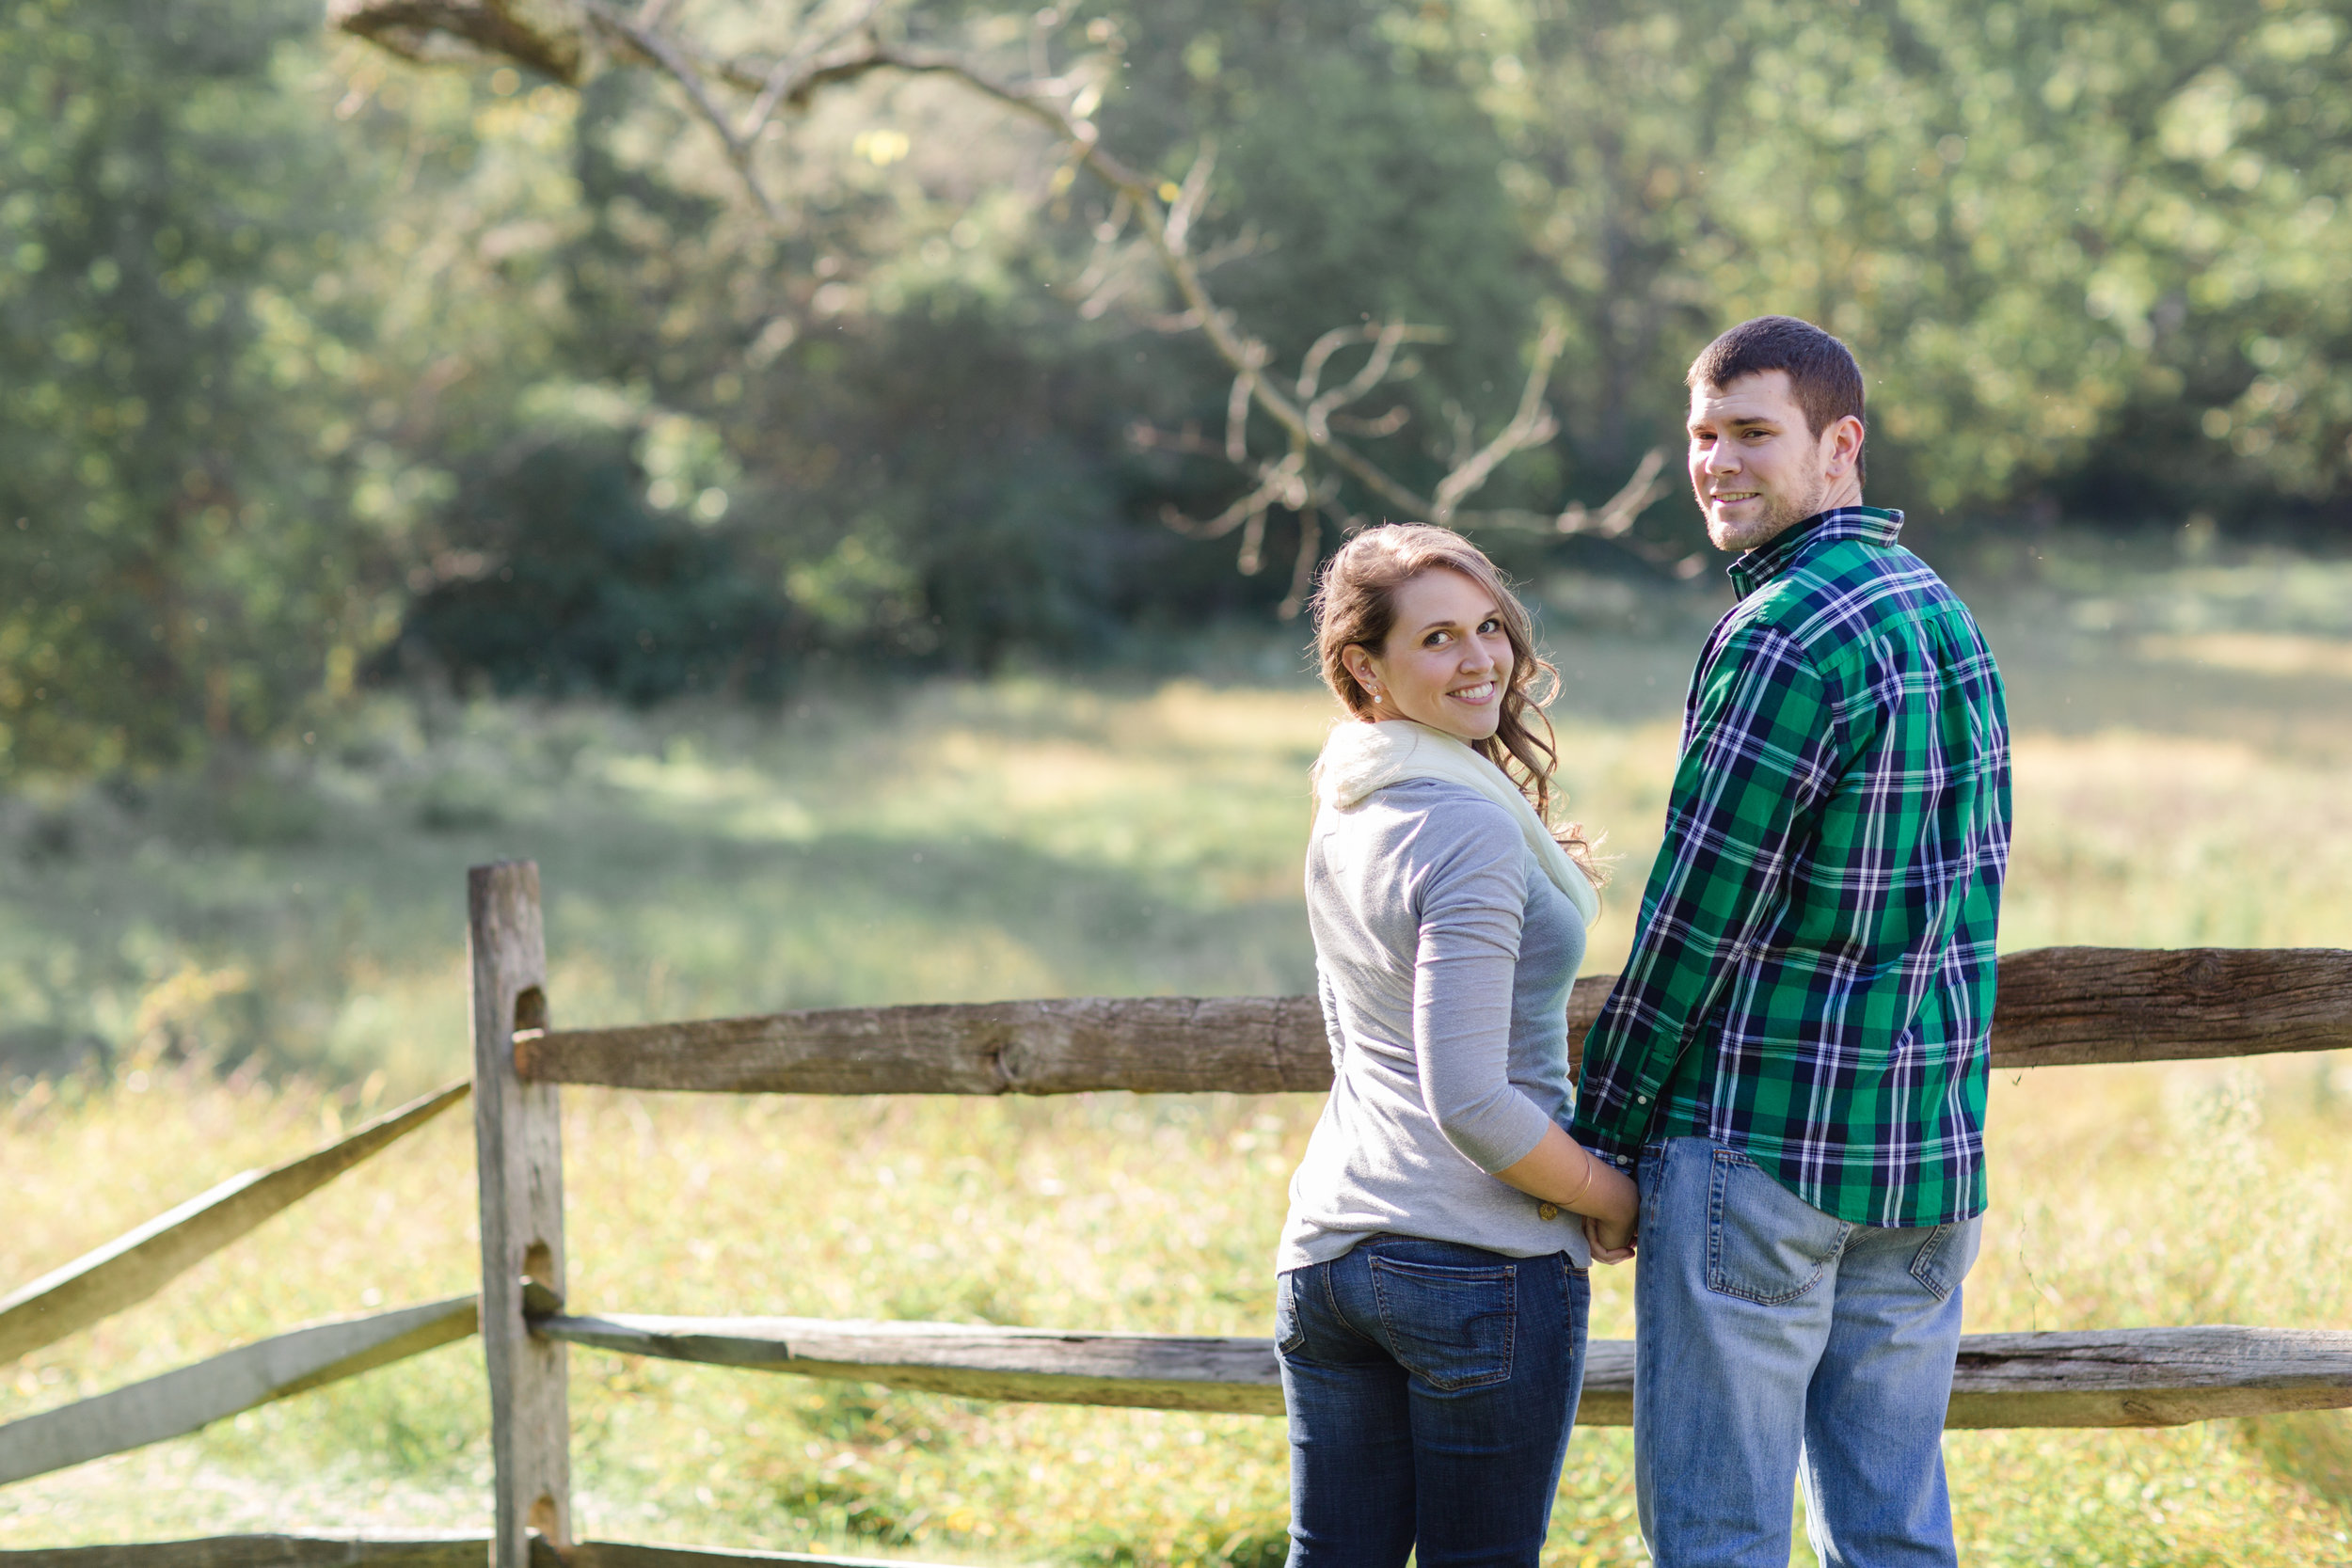 Valley Forge National Park Philly Scranton PA Fall Engagement Session Photos_JDP-2.jpg